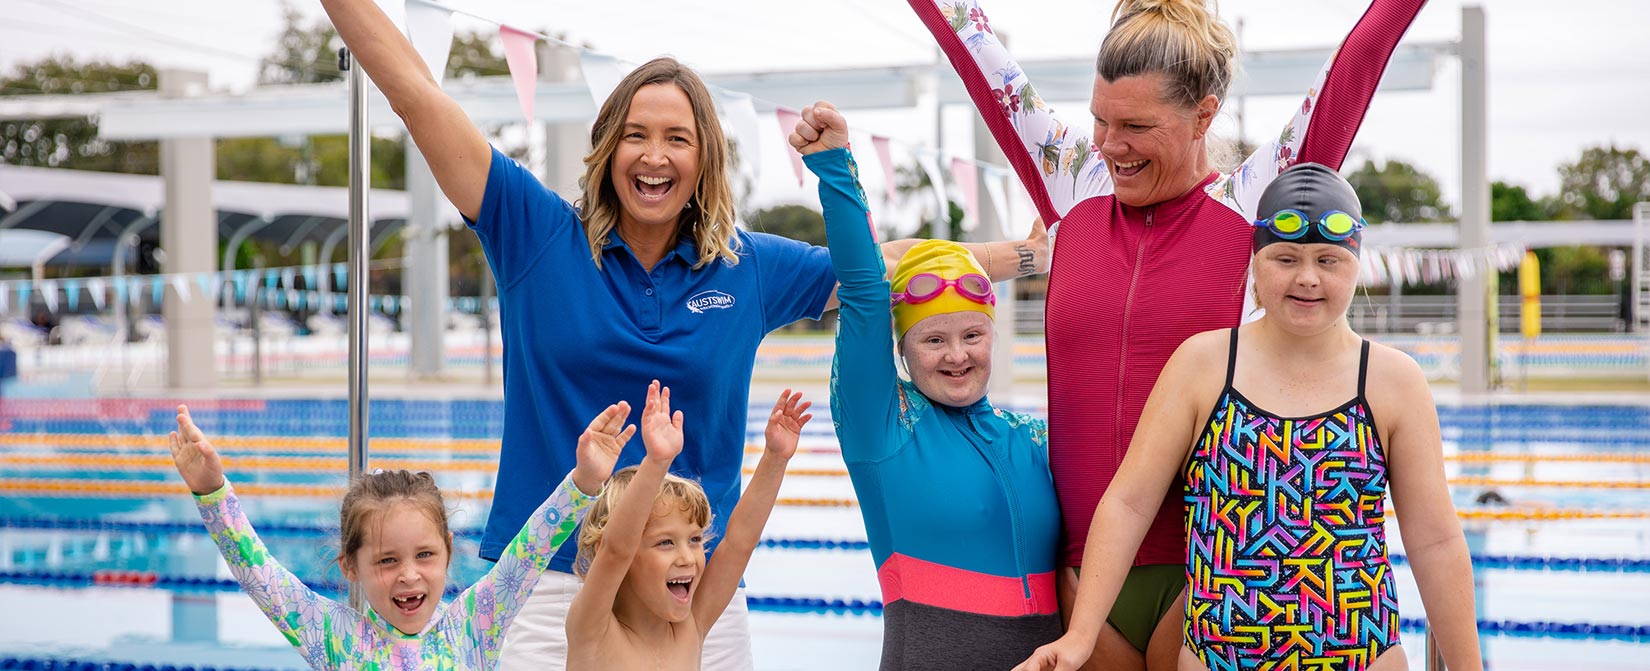 Brooke Hanson poses for photo with a group of children at a swimming pool.